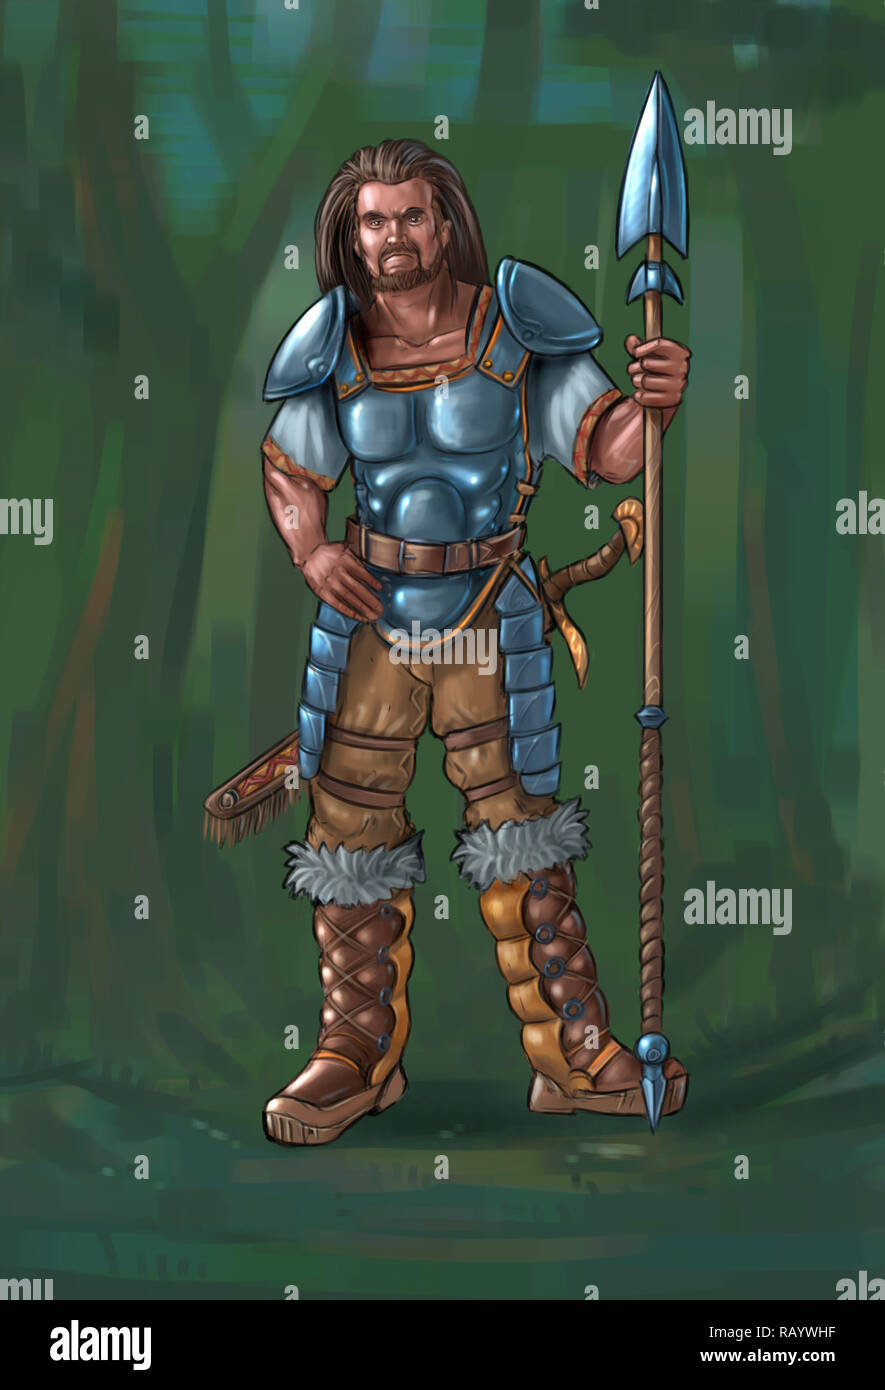 Concept Art Fantasy Illustration of Warrior Hunter With Spear Stock Photo